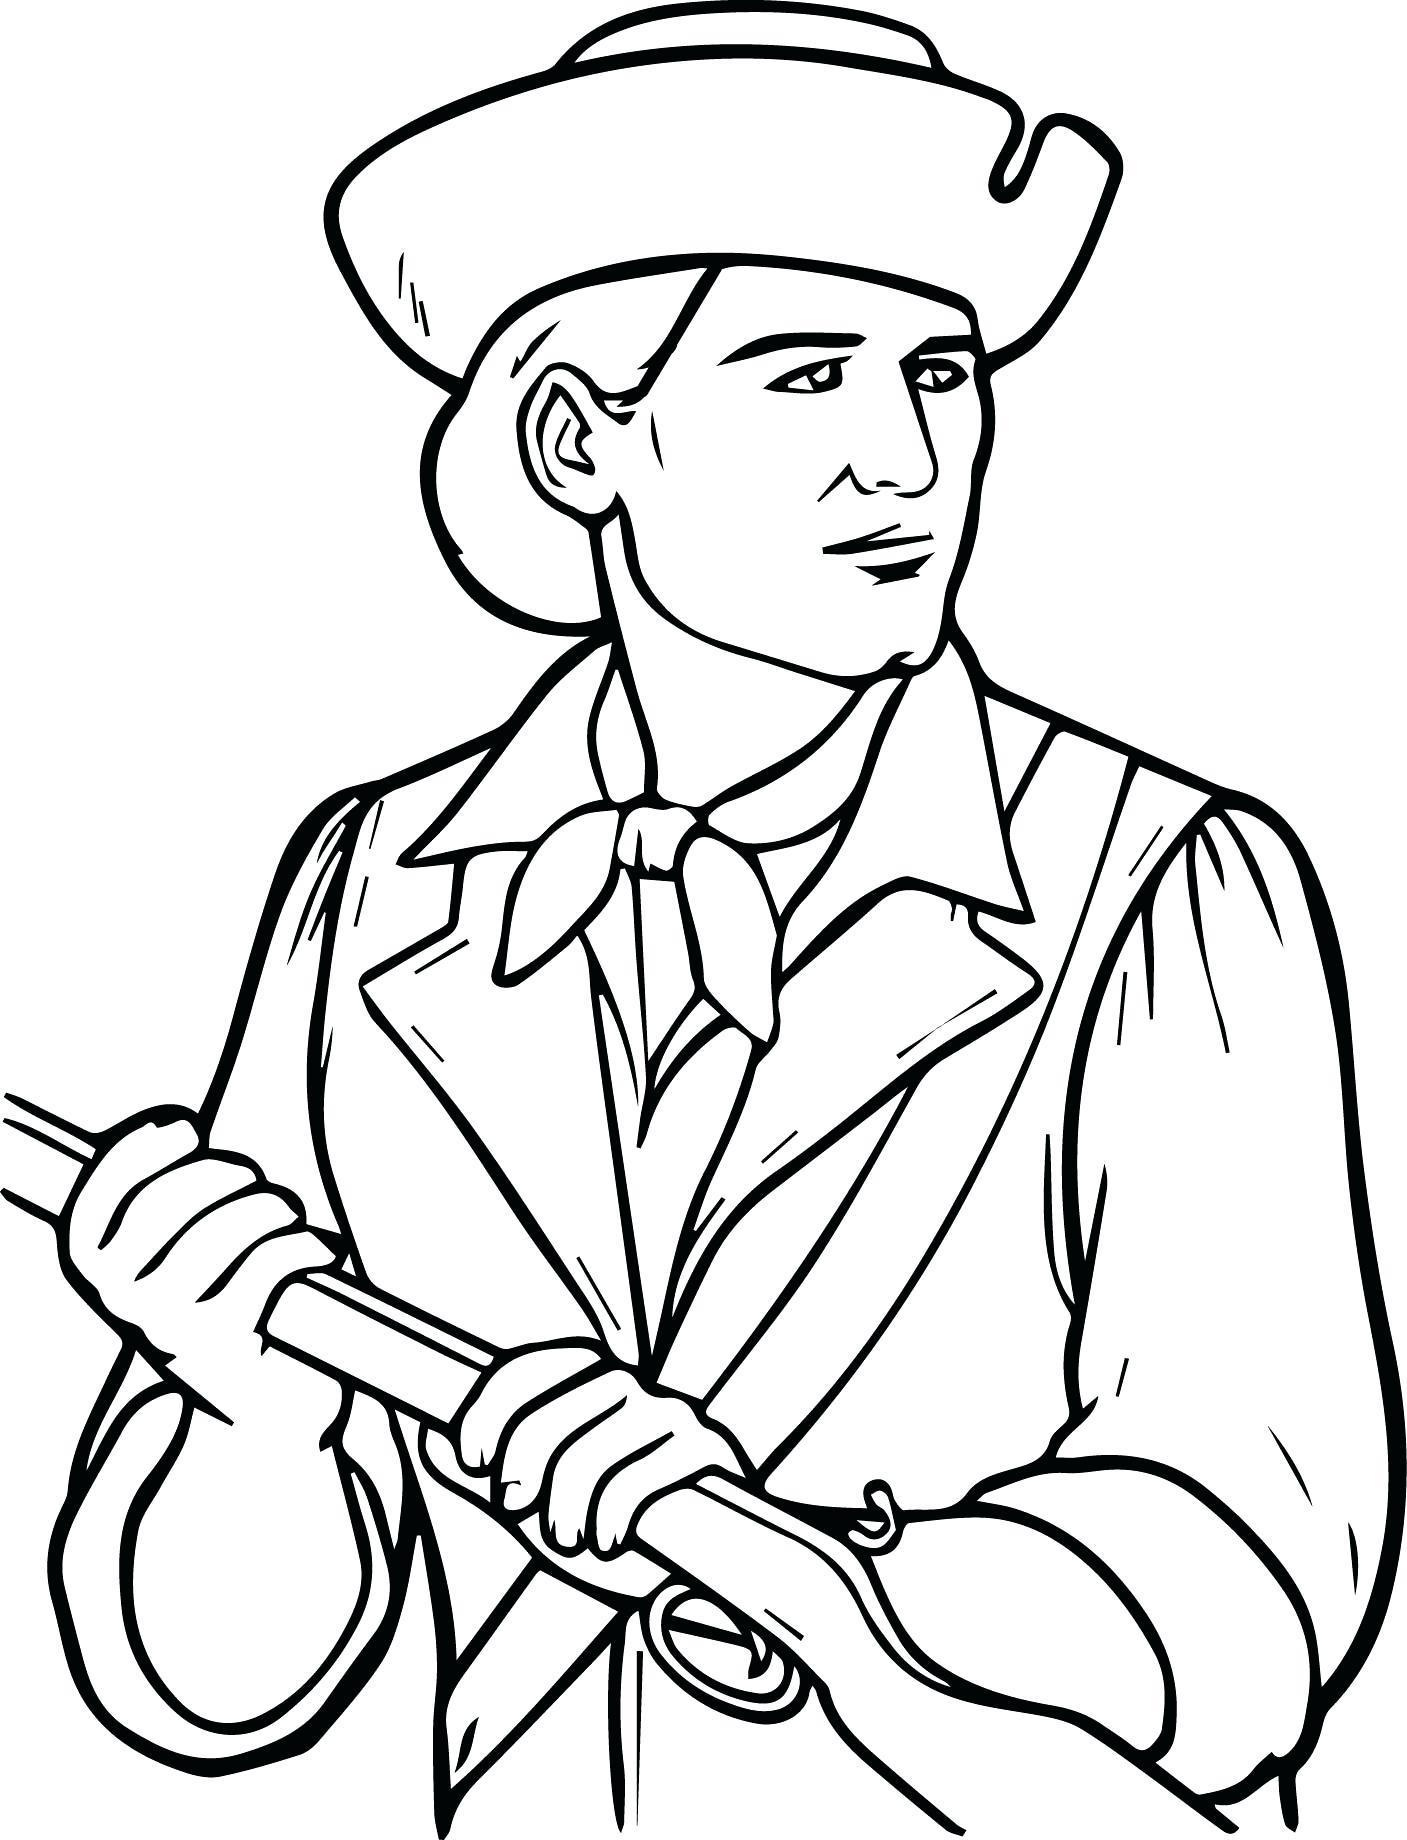 Printable American Revolution Coloring Pages Pdf - Free Printable American Revolution Coloring Pages